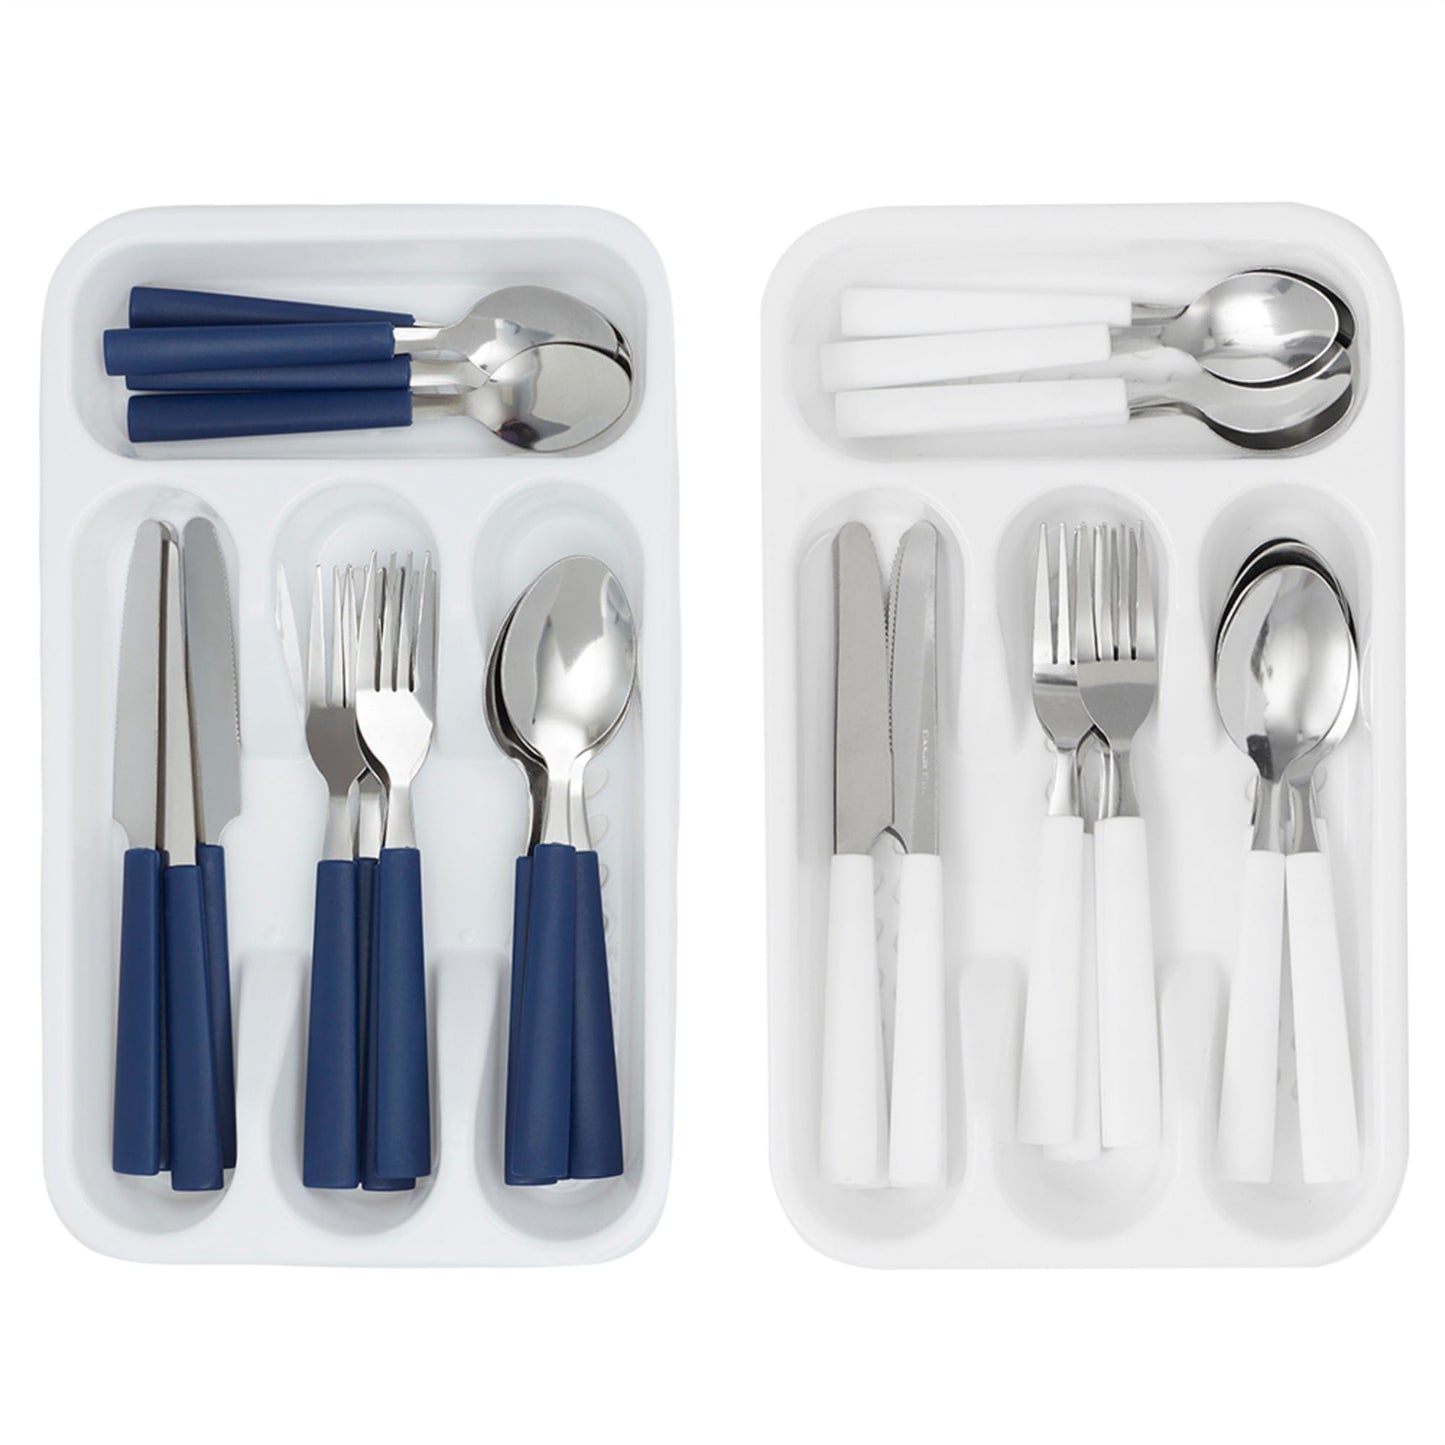 16 Piece Stainless Steel Flatware Set with Plastic Tray